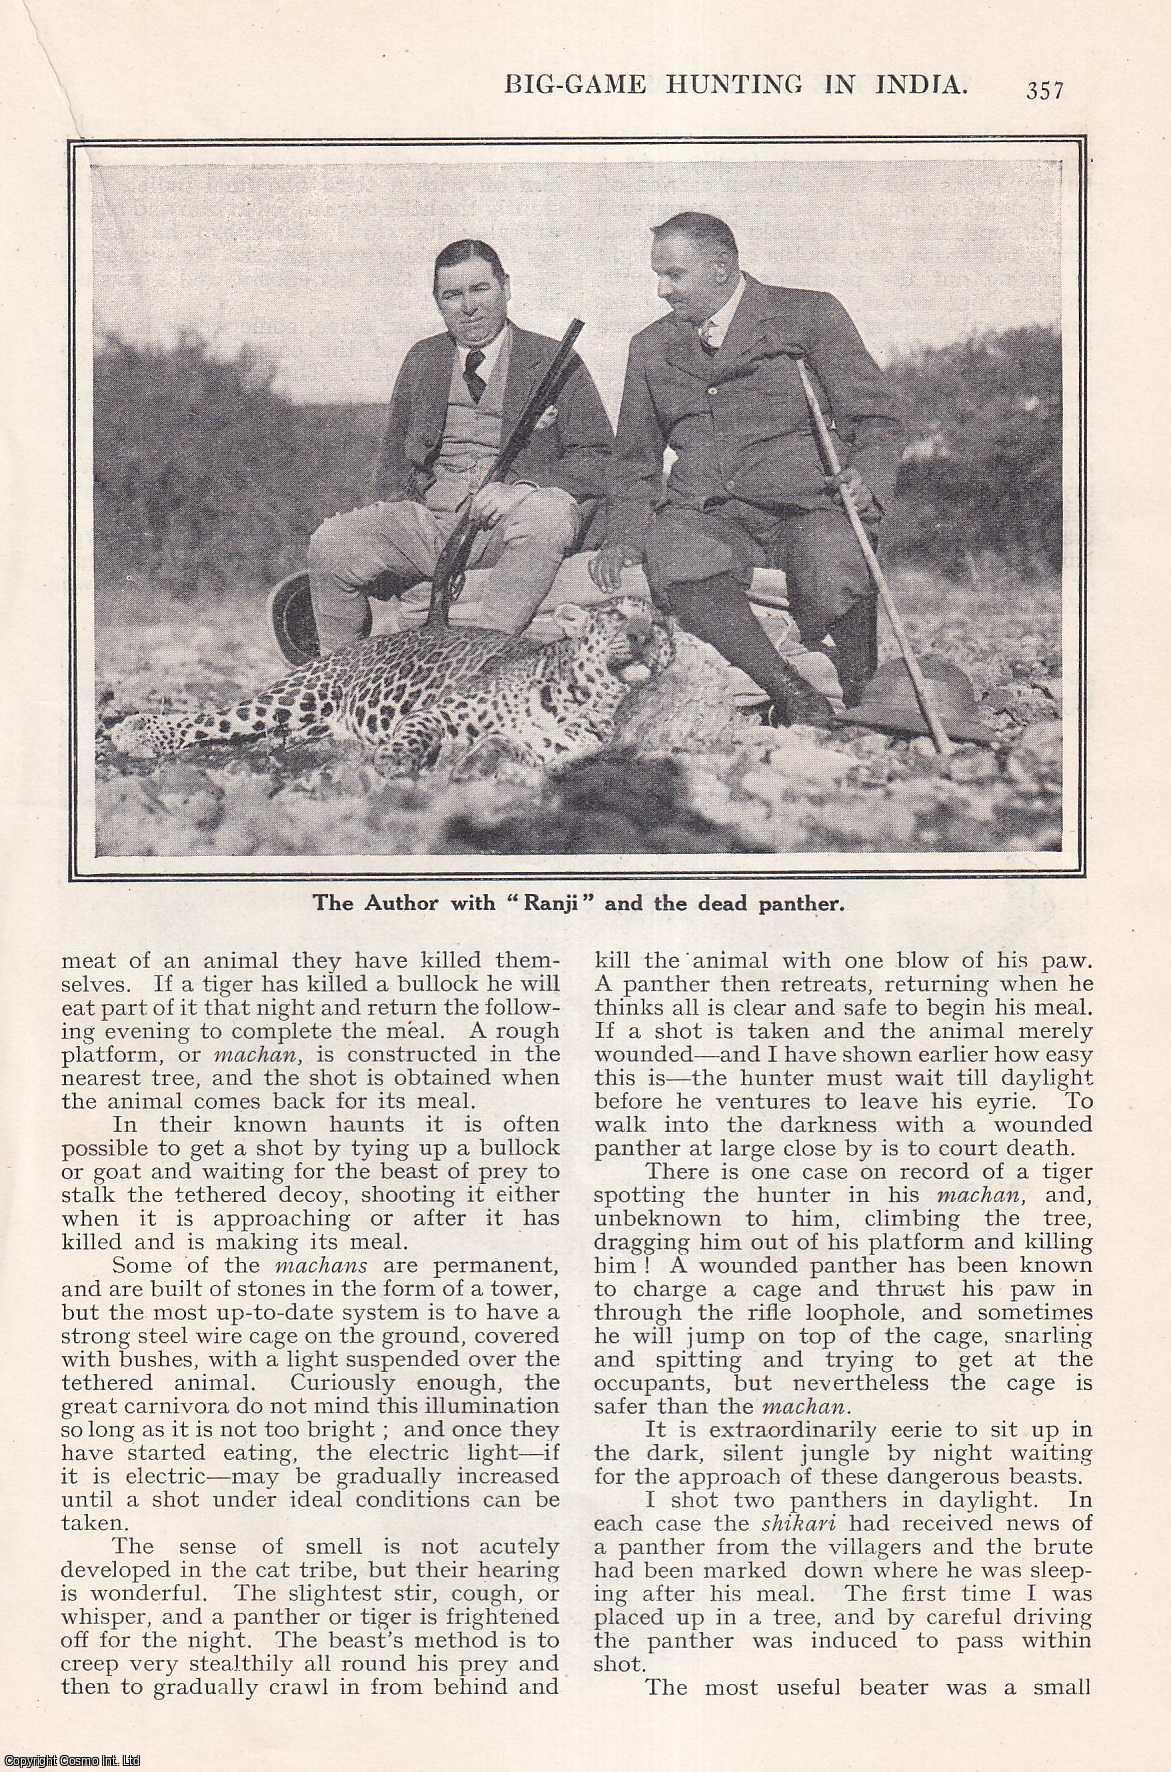 BIG GAME HUNTING - Big-Game Hunting in India. By Lieut. Commander The Hon. J.M. Kenworthy R.N., M.P. An uncommon original article from the Wide World Magazine, 1930.